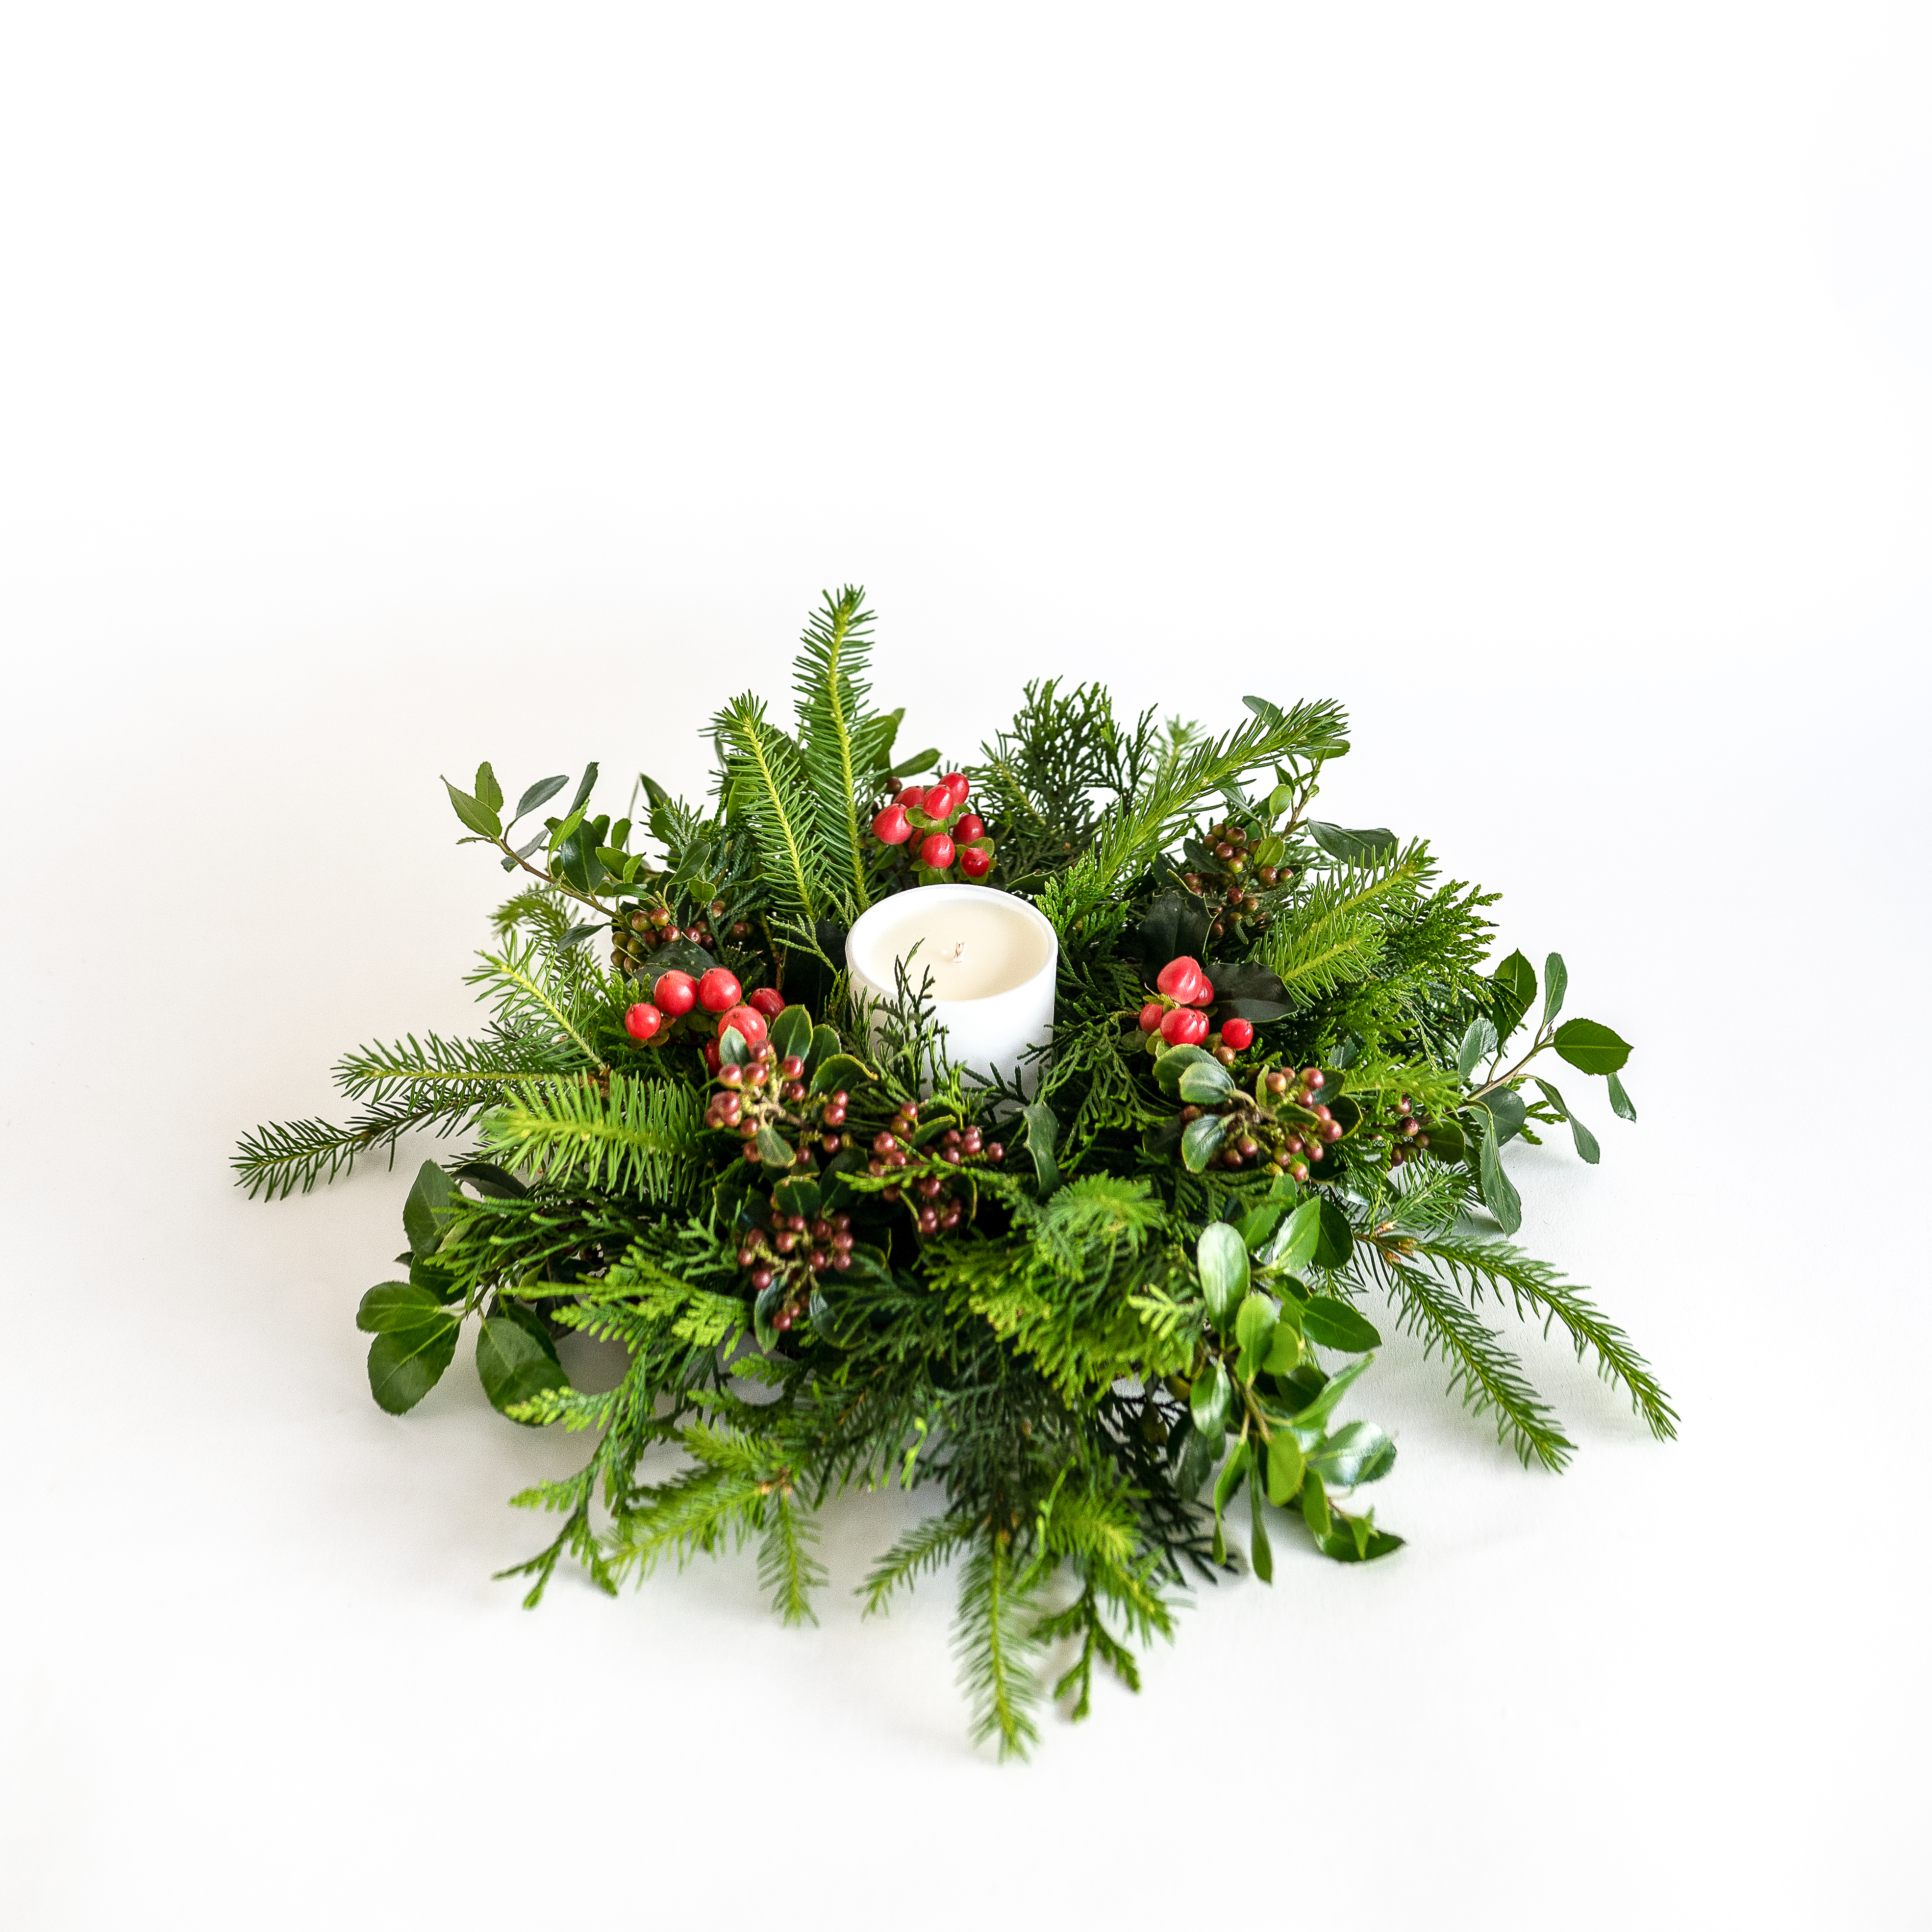 Fresh pine foliage christmas wreath with pine scented Ecoya candle.